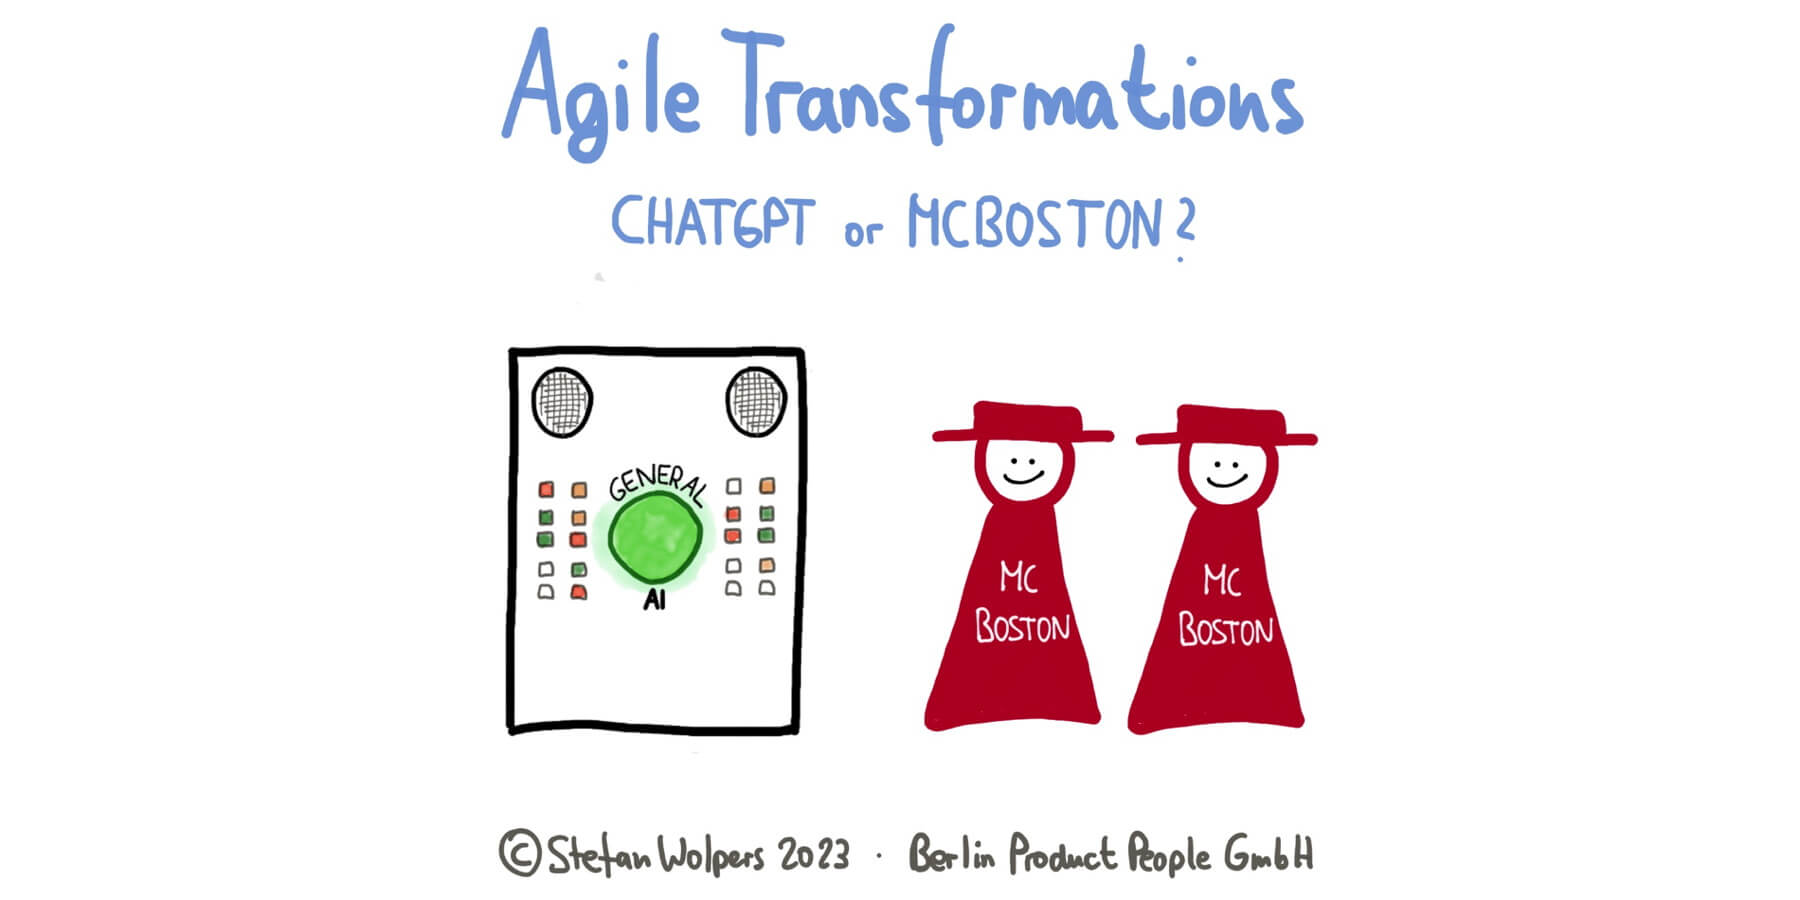 Agile Transformation with ChatGPT or McBoston? Berlin-Product-People.com